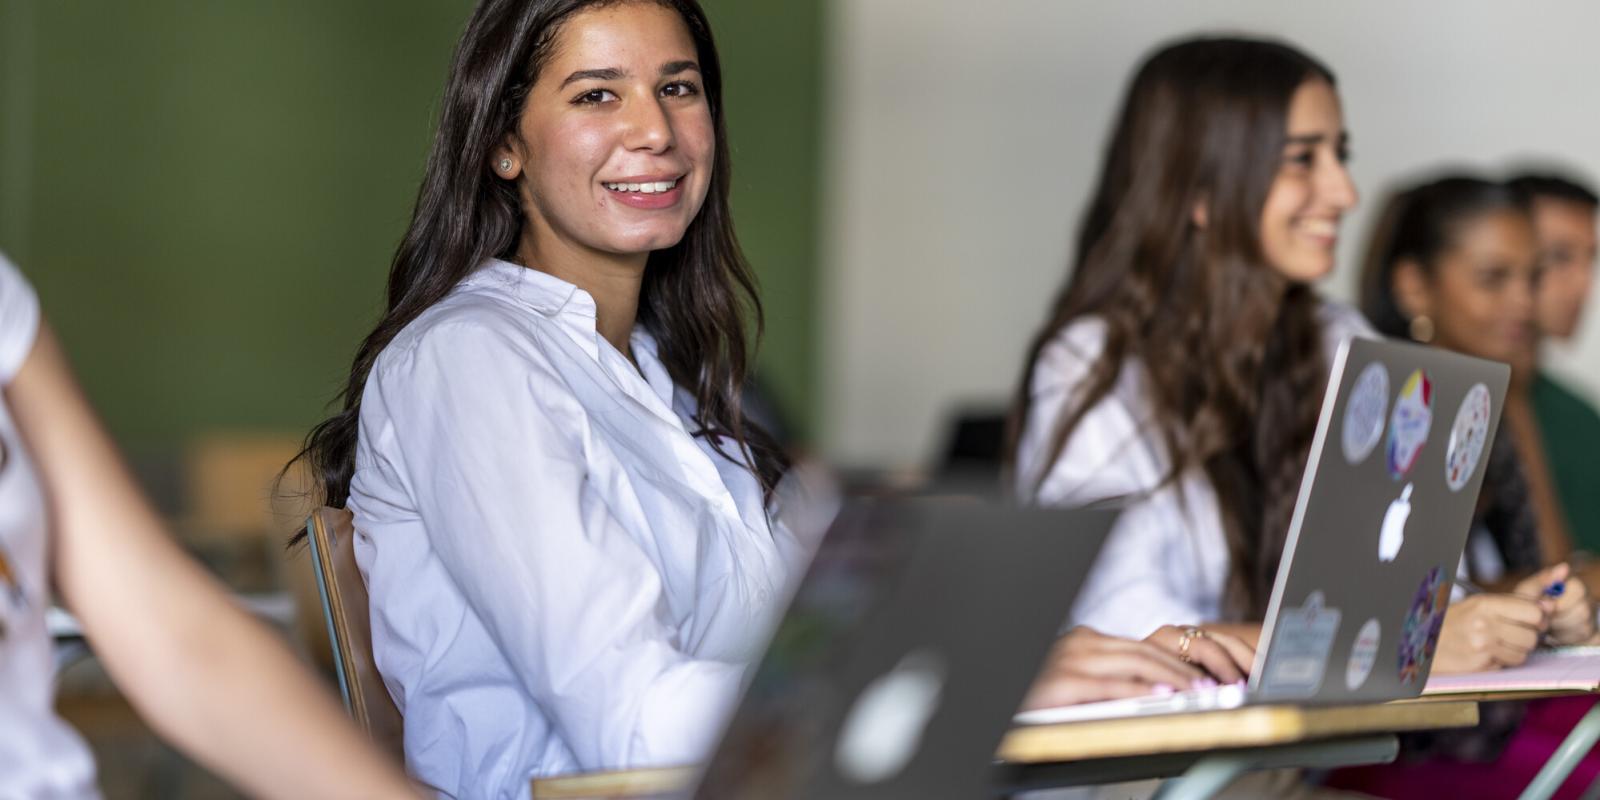 female student smiling in classroom 